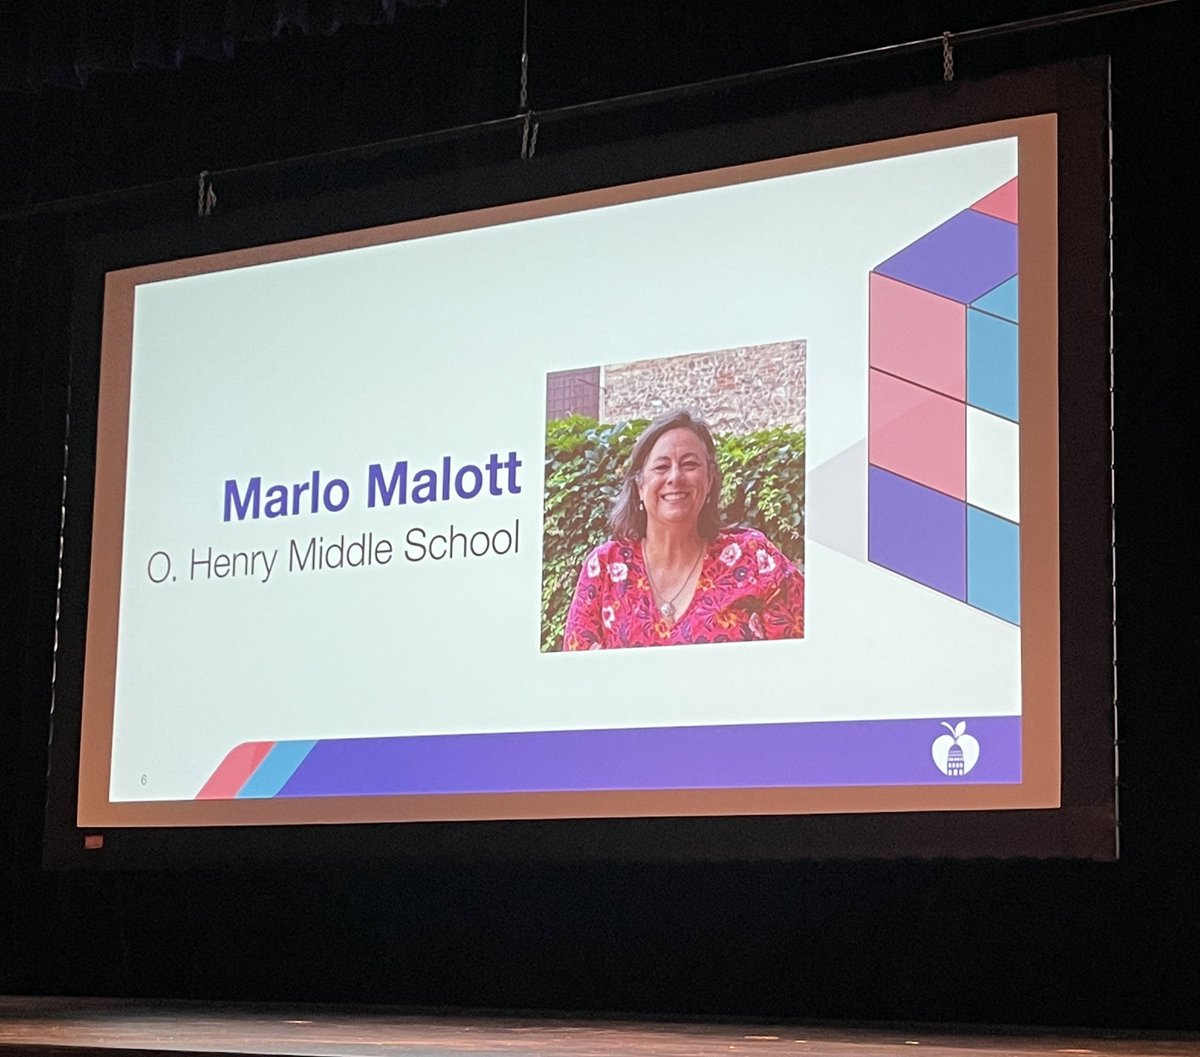 Congratulations @MalottMarlo on receiving the Rubix Cube award from Superintendent @Matias_AISD for her compassionate leadership and heart to serve others. @Ohenryms is lucky to have a joyful leader like her at the helm of the work and we are too!